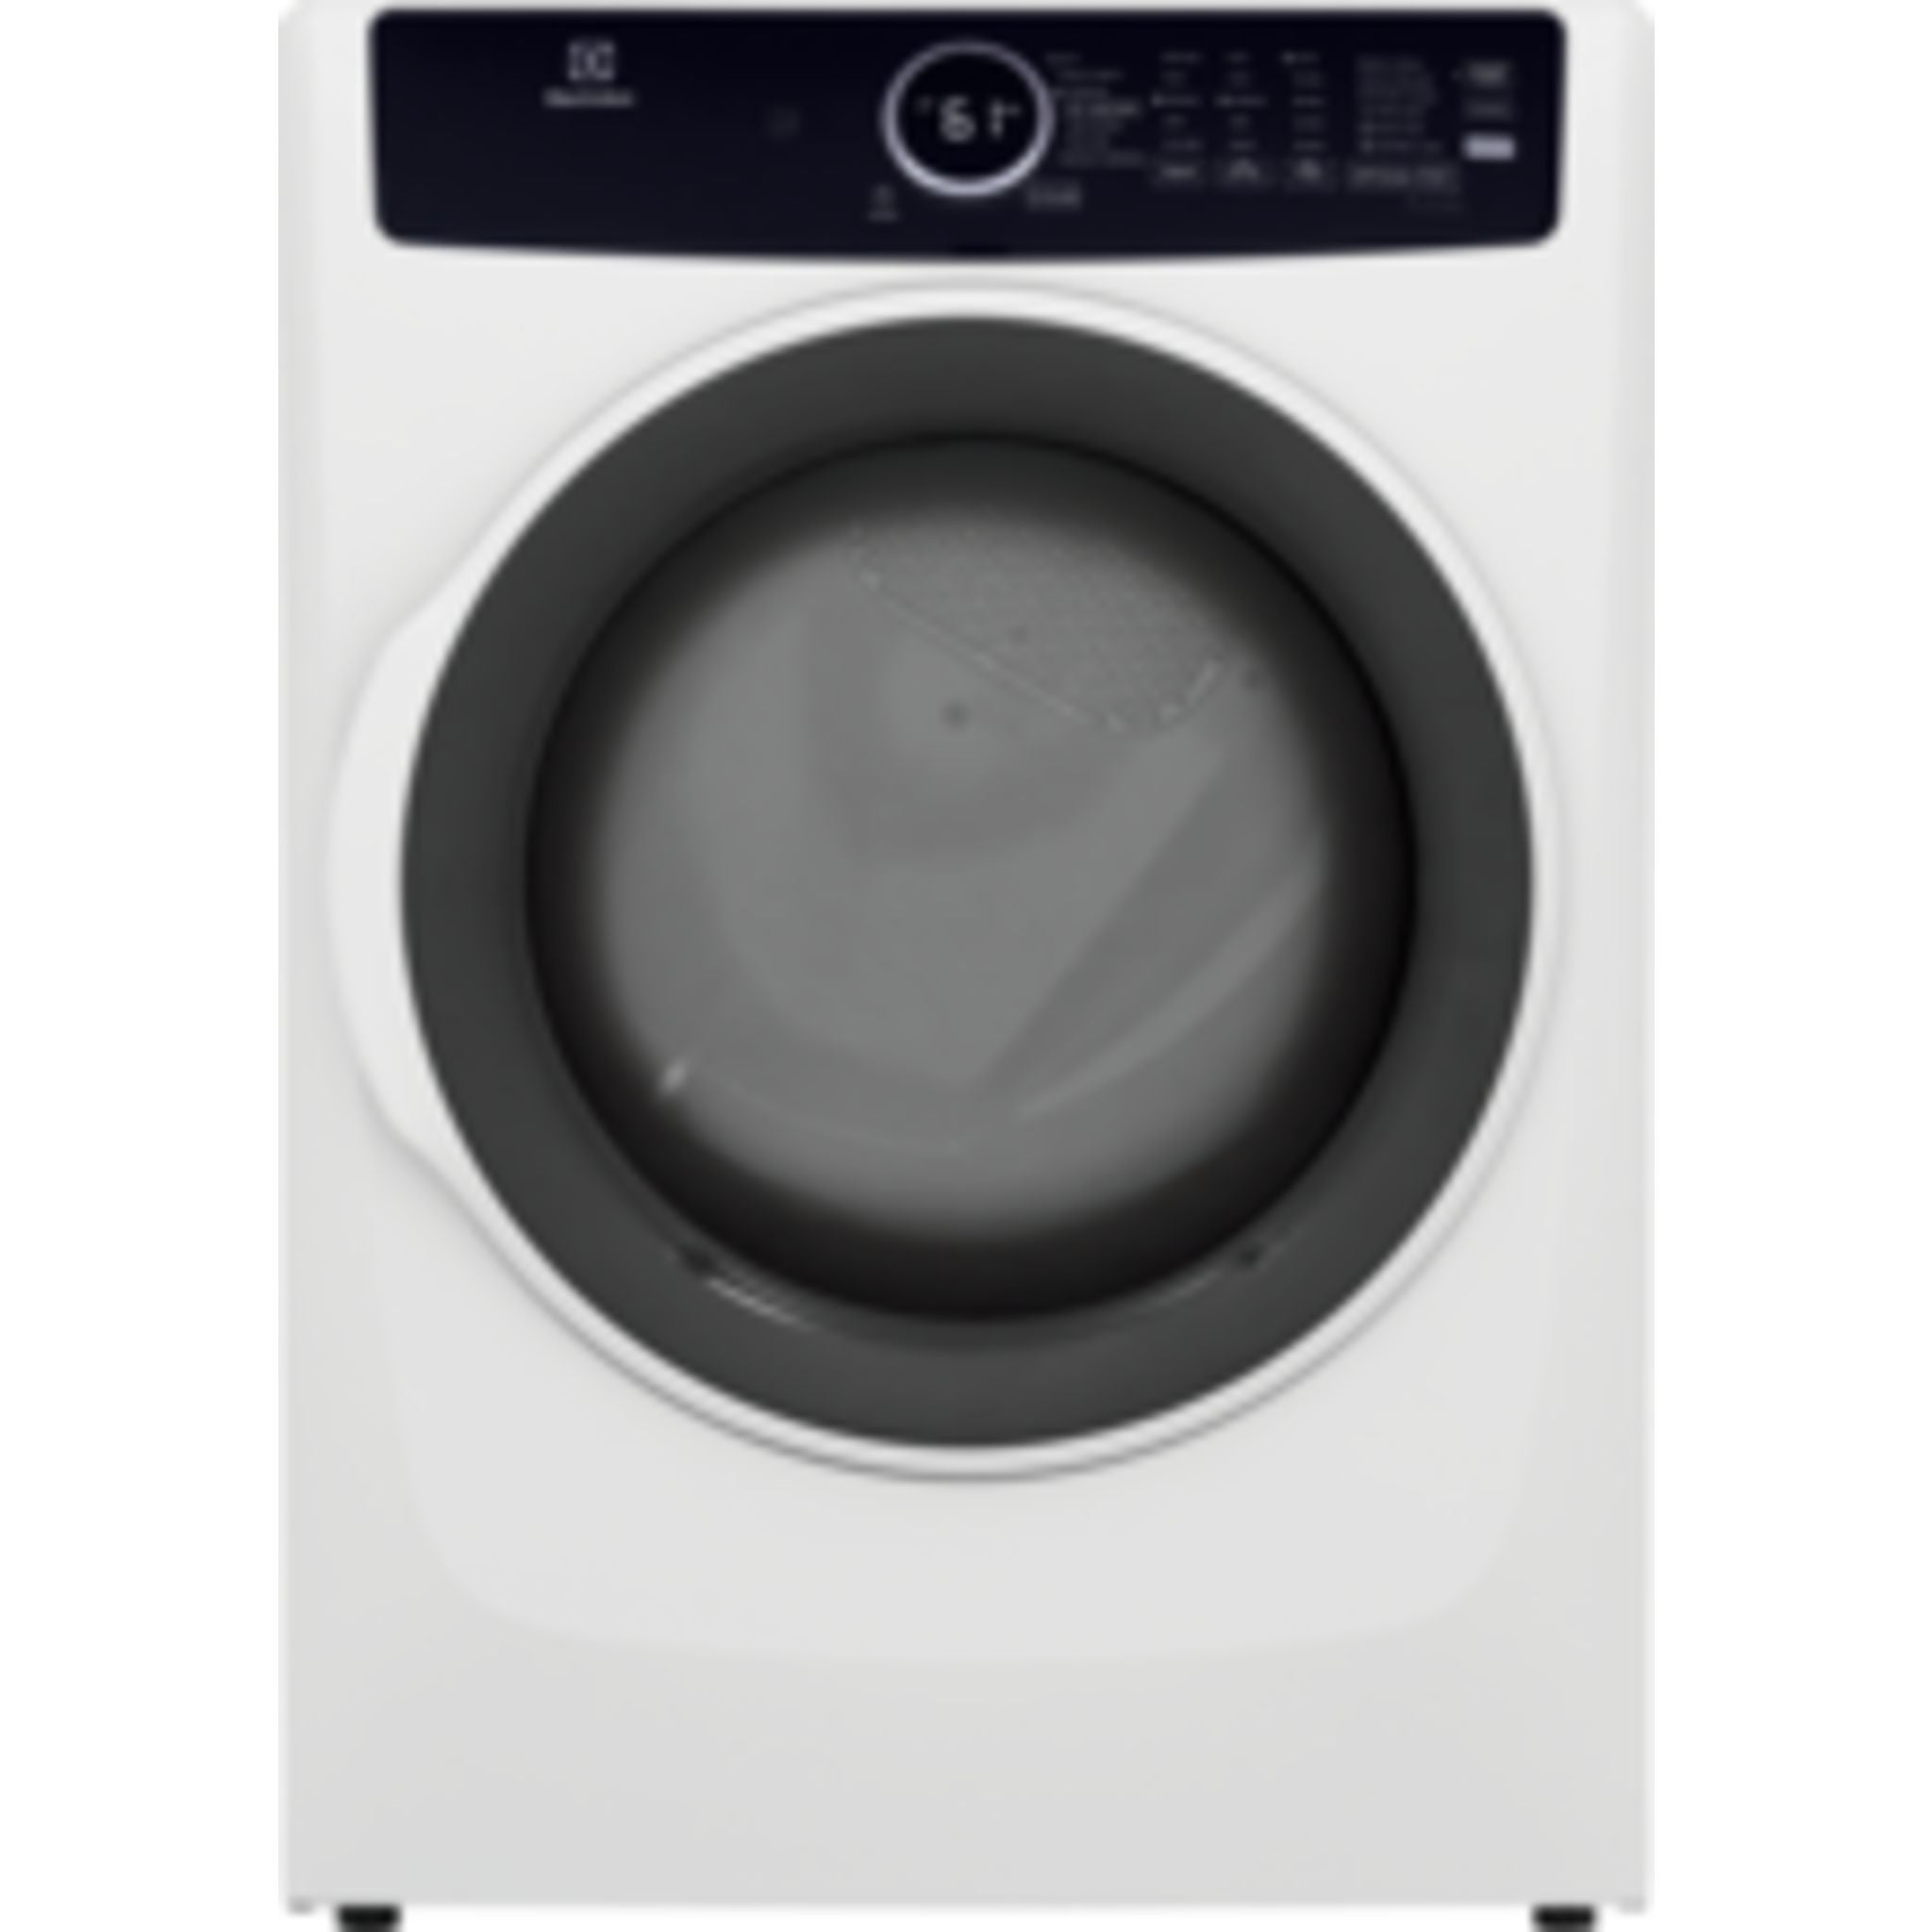 Electrolux Home Products, Electrolux Dryer (ELFE743CAW) - White